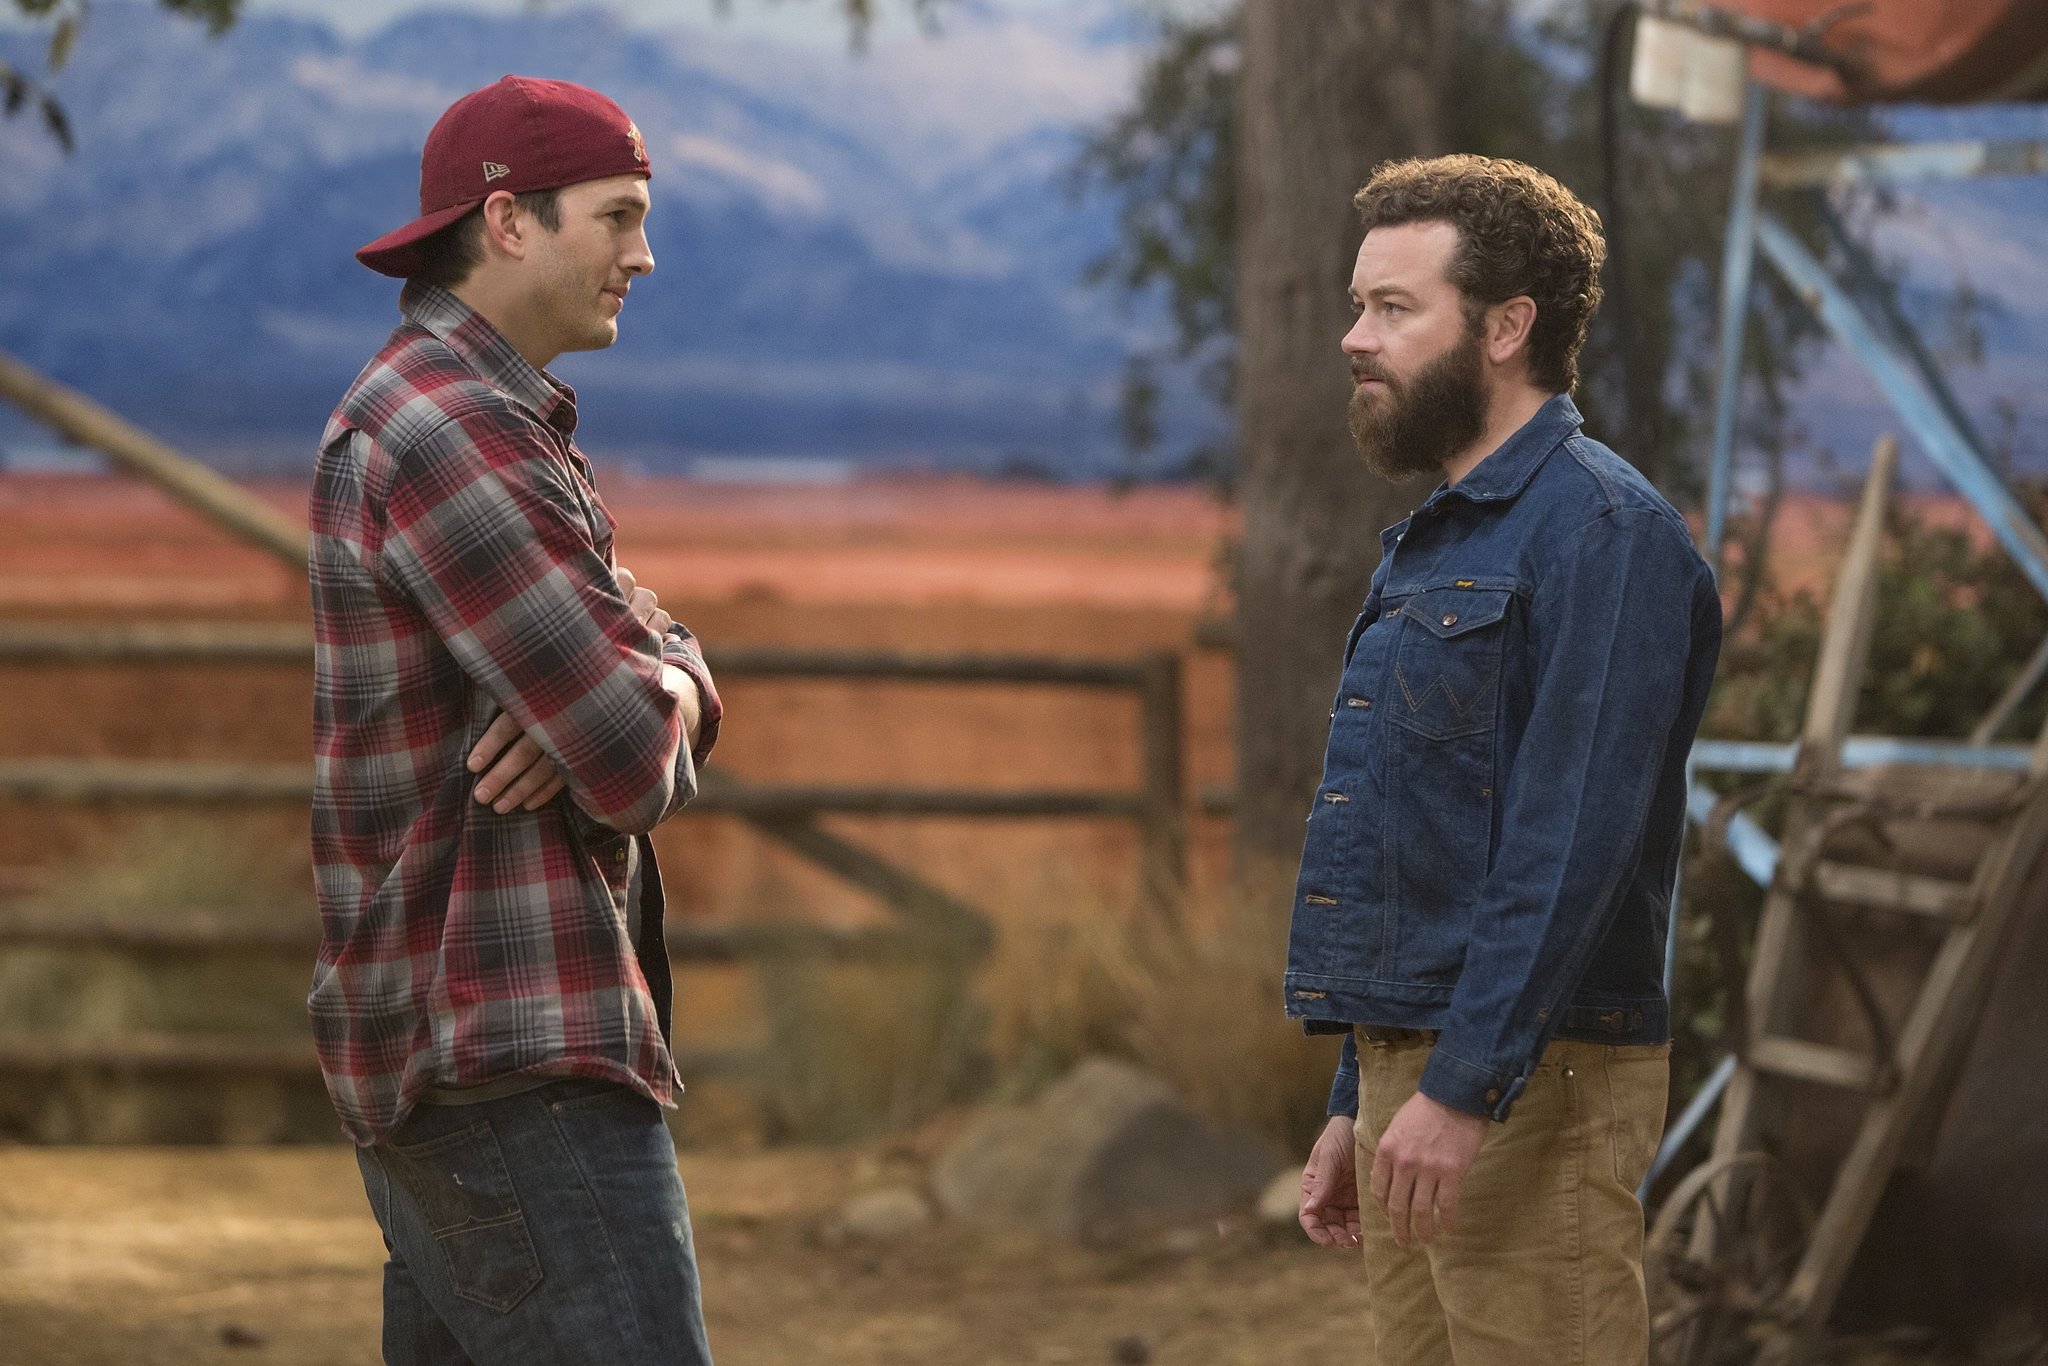 Ashton Kutcher and Danny Masterson talk to each other outside in The Ranch